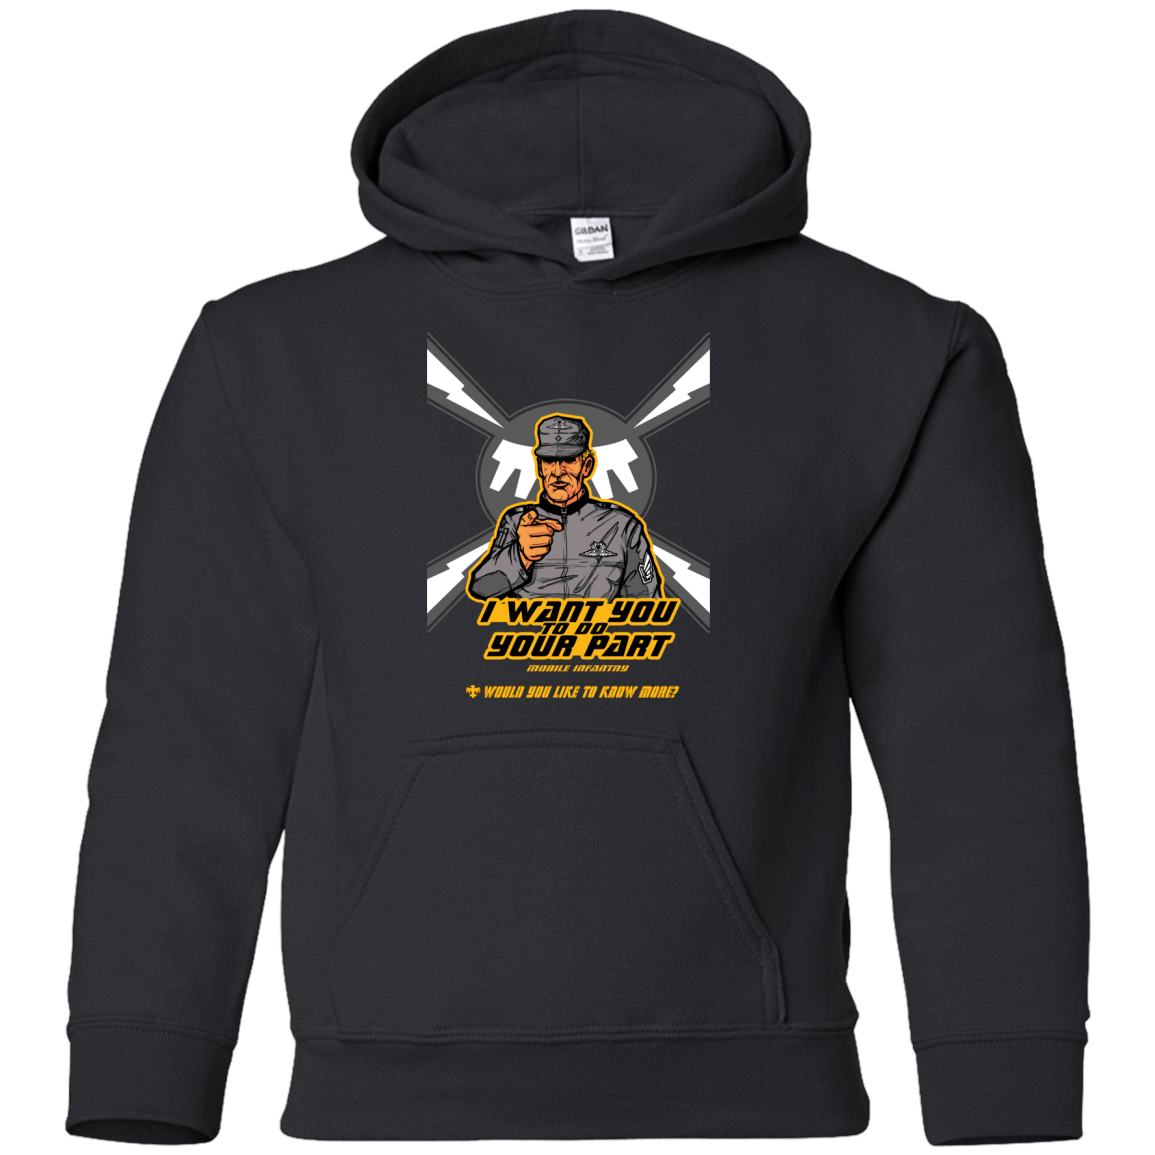 Sweatshirts Black / YS Do Your Part Youth Hoodie